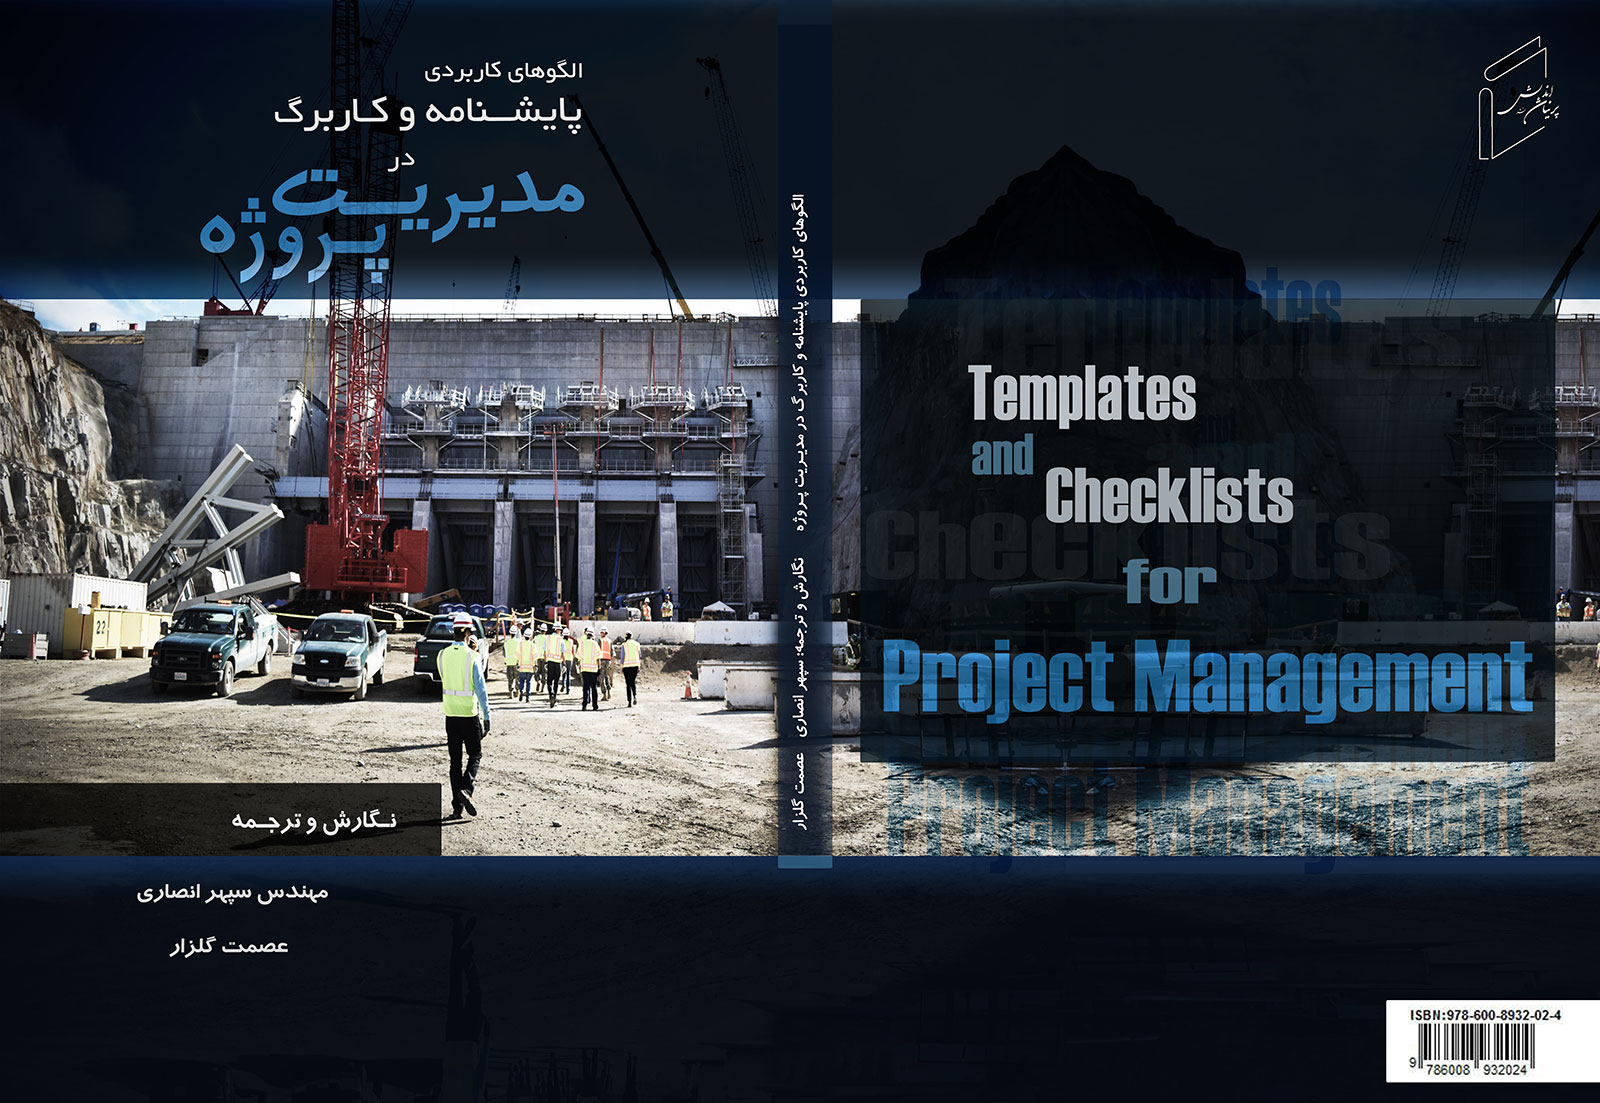 Application models of project management, reports, checklists and worksheets